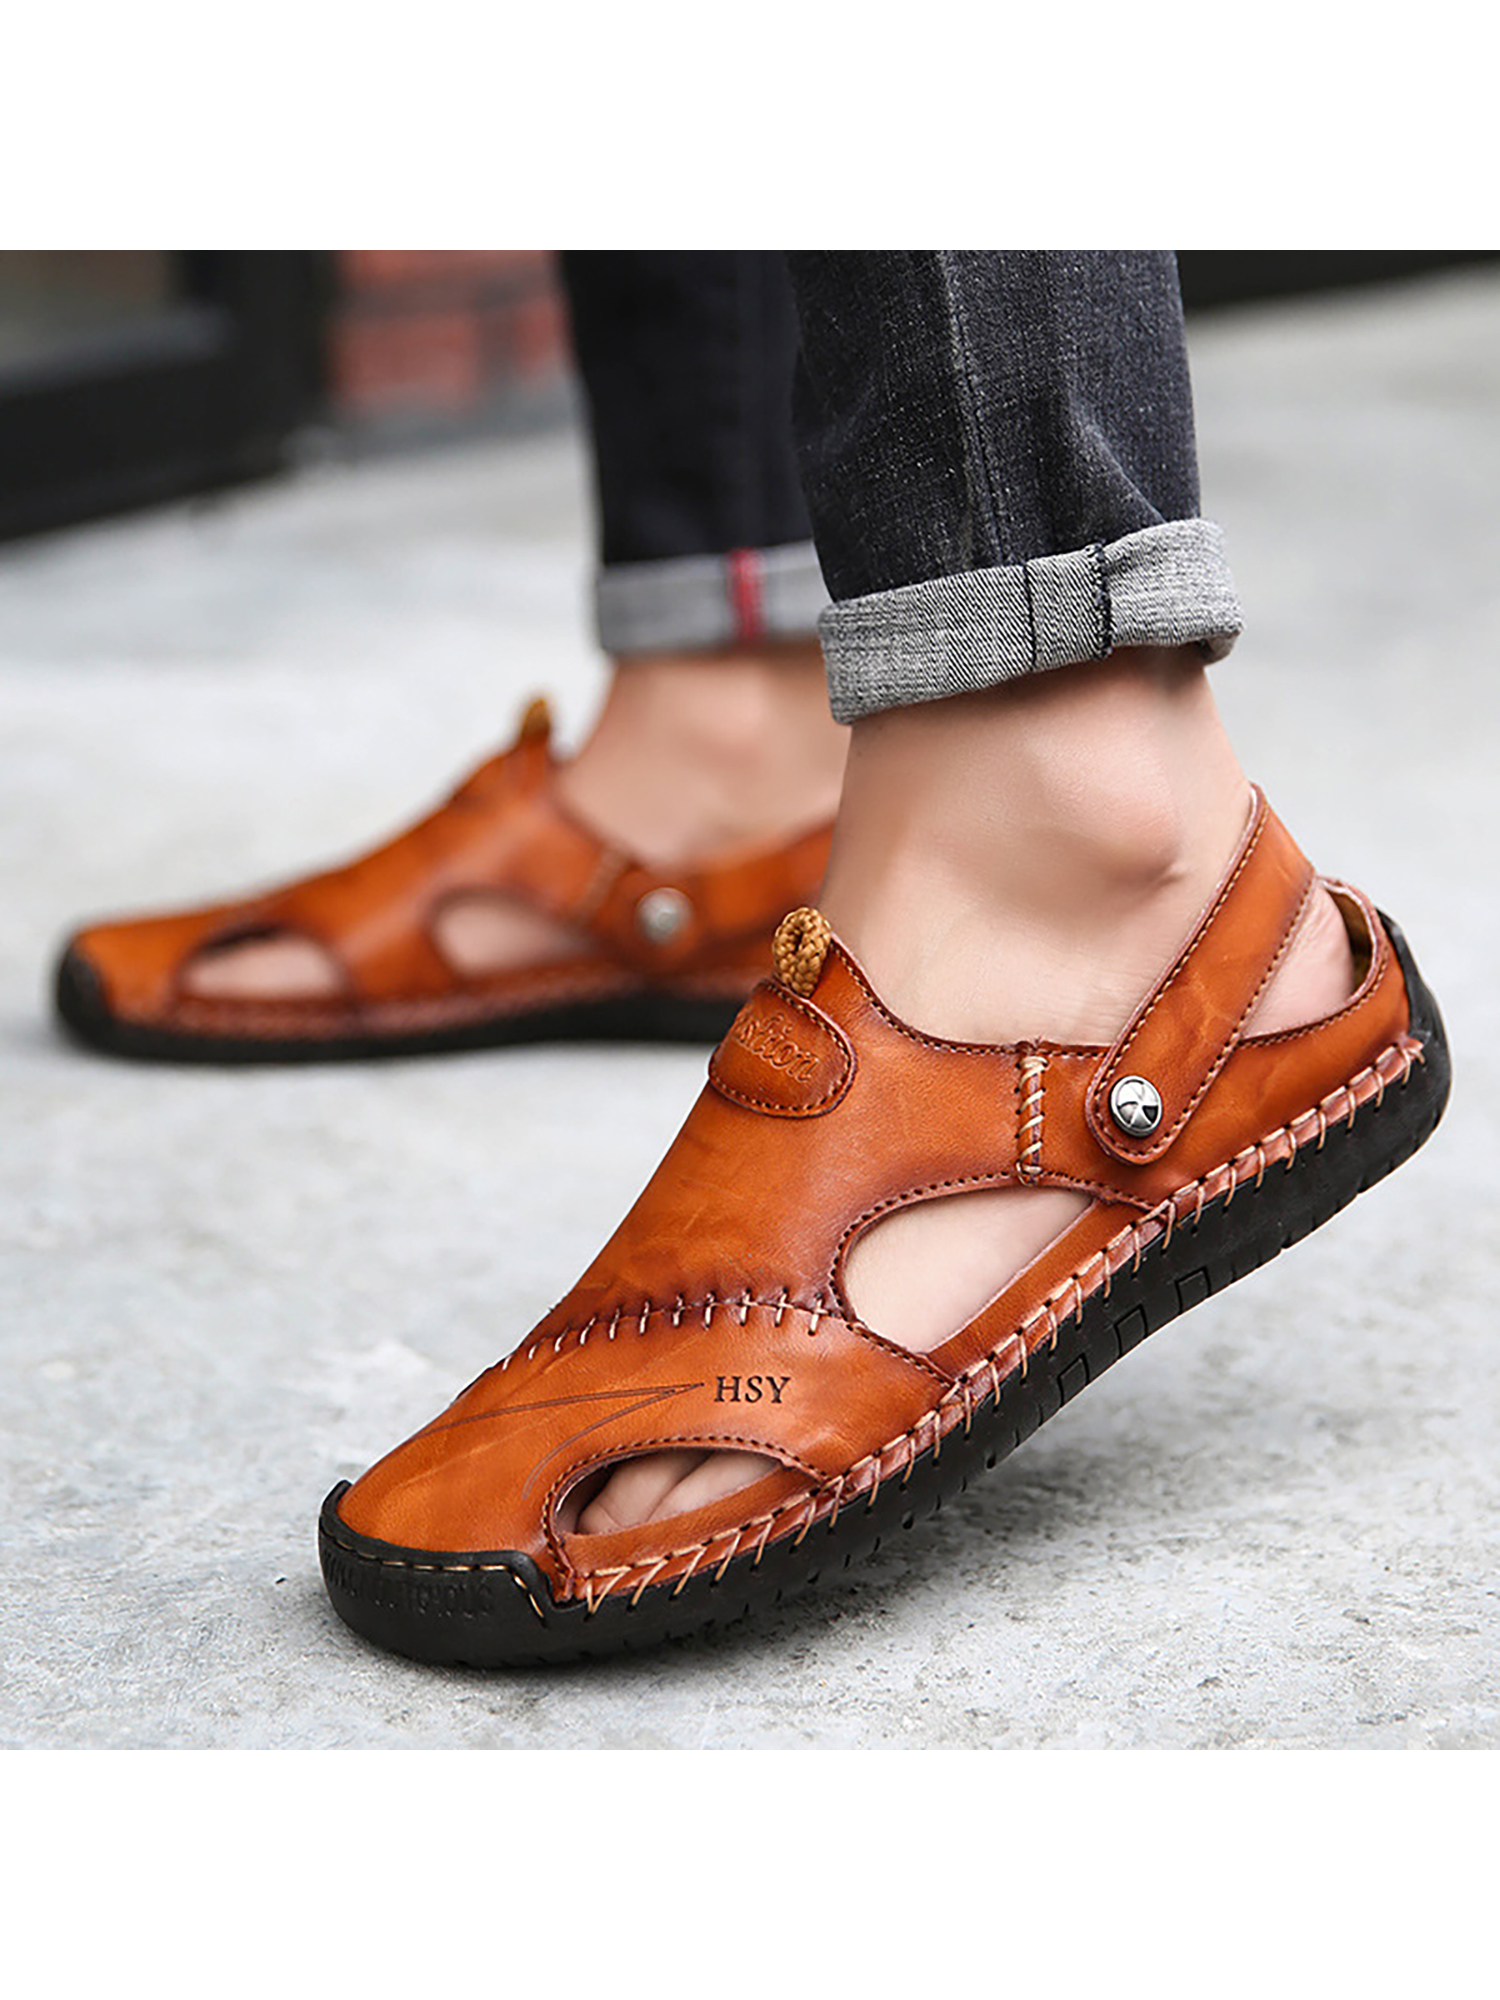 Avamo Mens Beach Sandals Leather Shoes Casual Summer Clogs Shoes Fashion Men Slippers - image 4 of 5